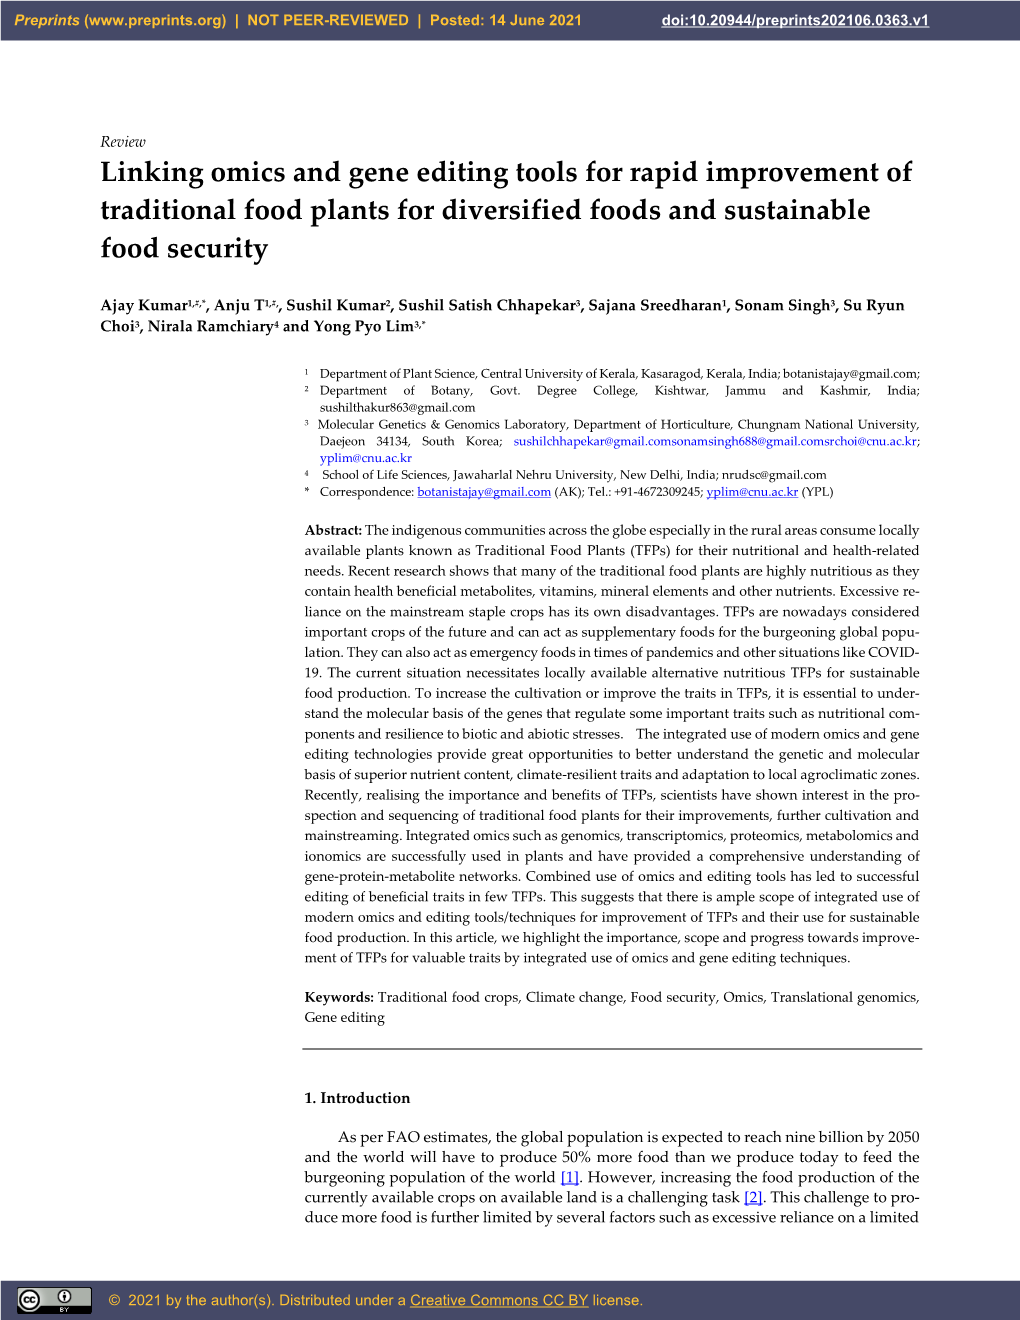 Linking Omics and Gene Editing Tools for Rapid Improvement of Traditional Food Plants for Diversified Foods and Sustainable Food Security